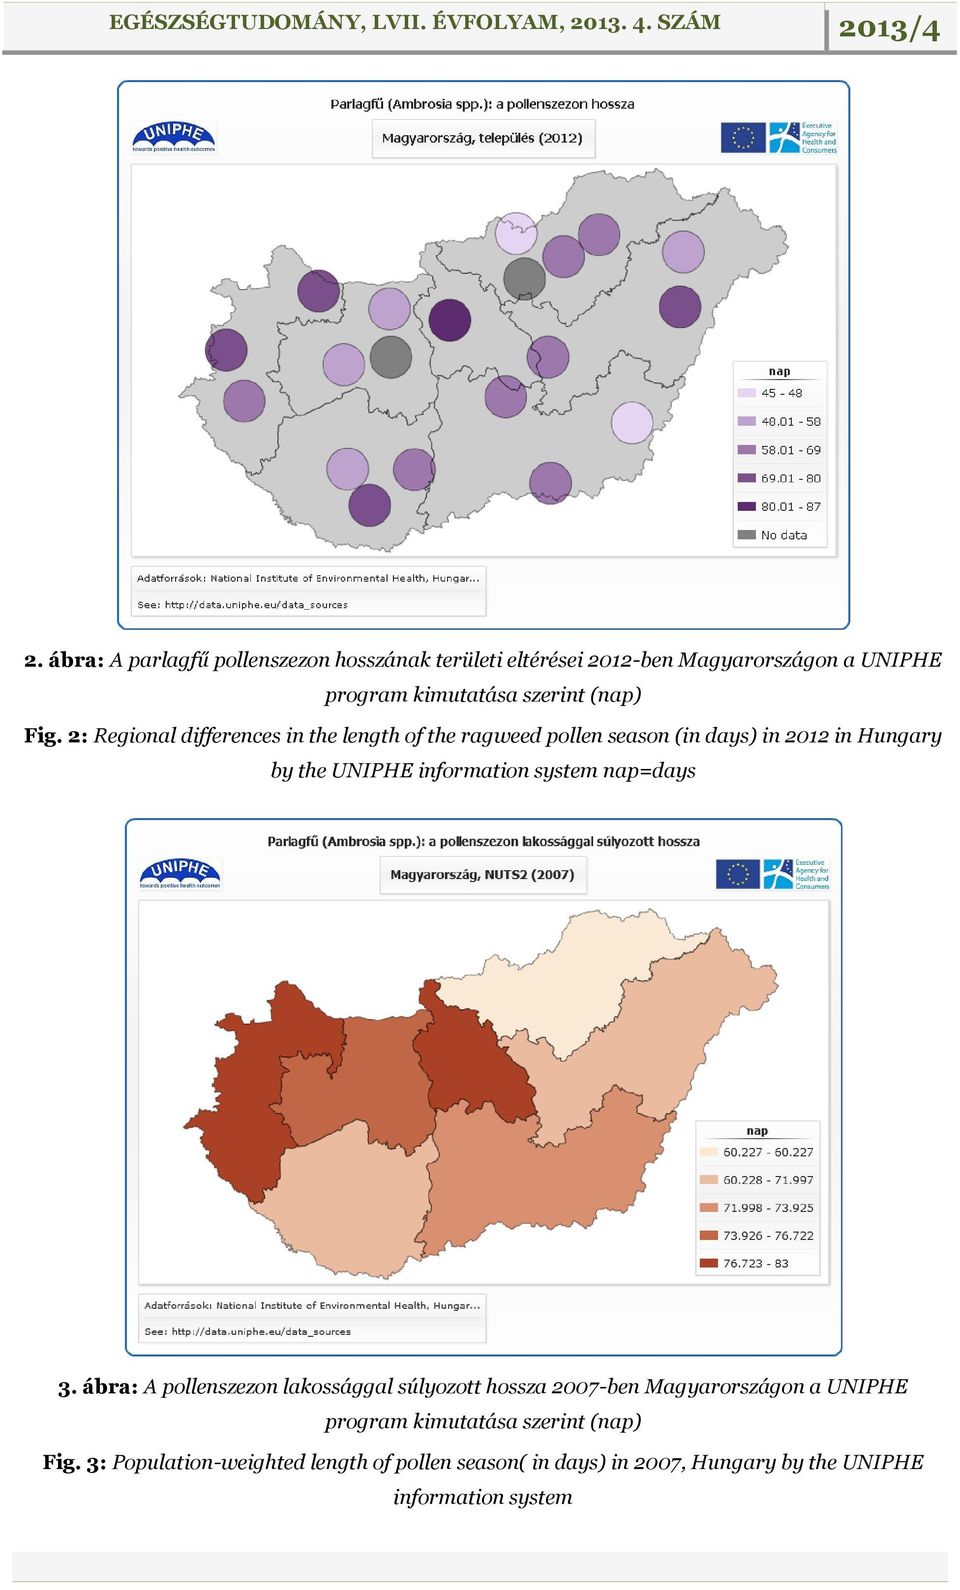 2: Regional differences in the length of the ragweed pollen season (in days) in 2012 in Hungary by the UNIPHE information